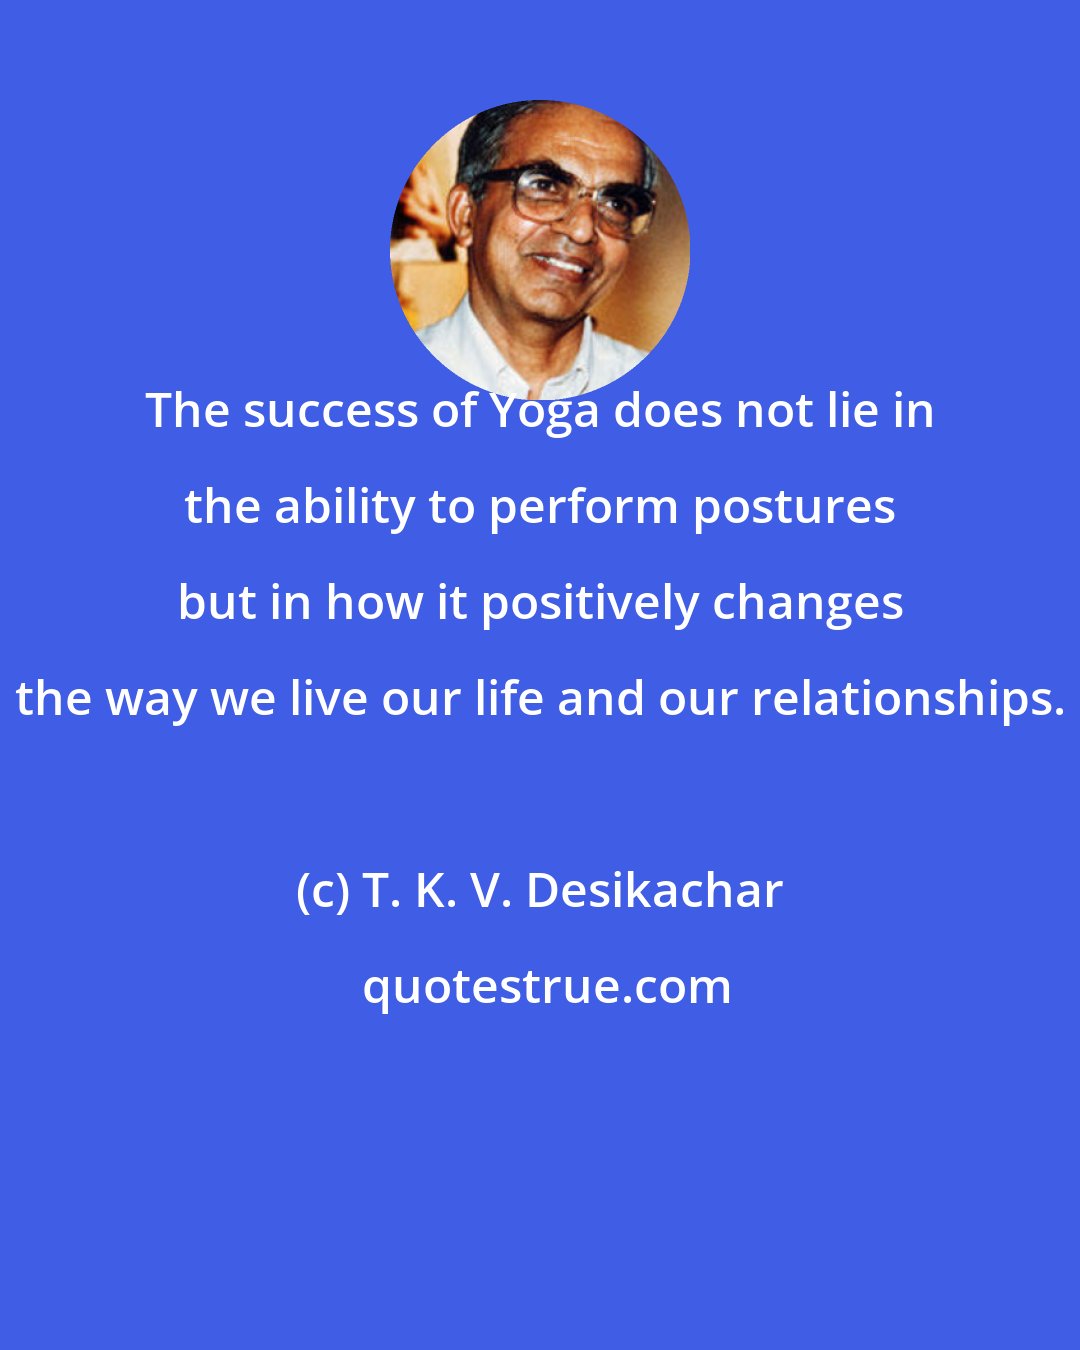 T. K. V. Desikachar: The success of Yoga does not lie in the ability to perform postures but in how it positively changes the way we live our life and our relationships.